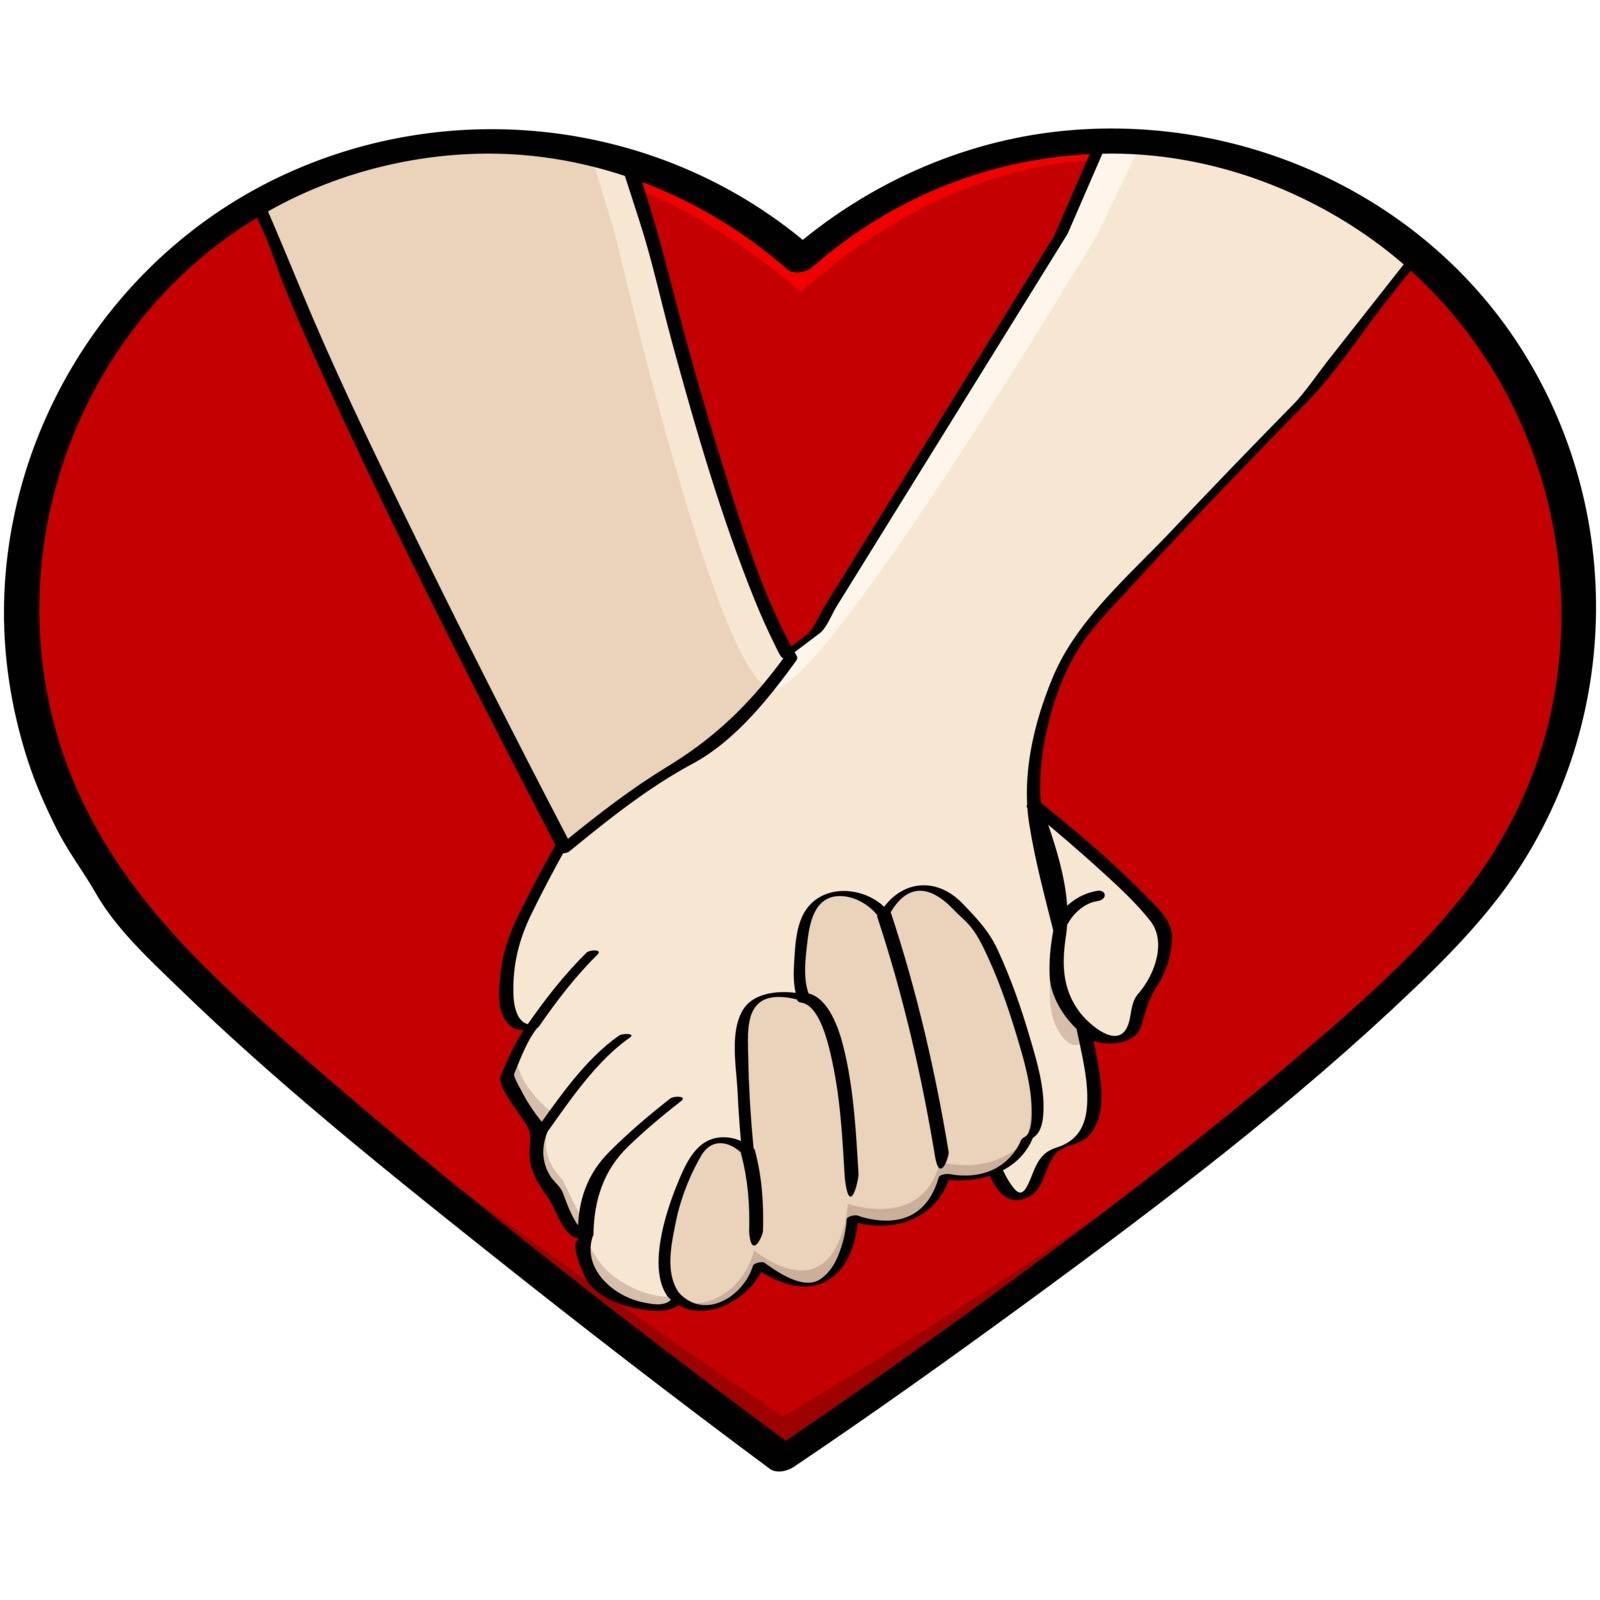 Cartoon illustration showing a close-up of a couple holding hands, framed by a heart